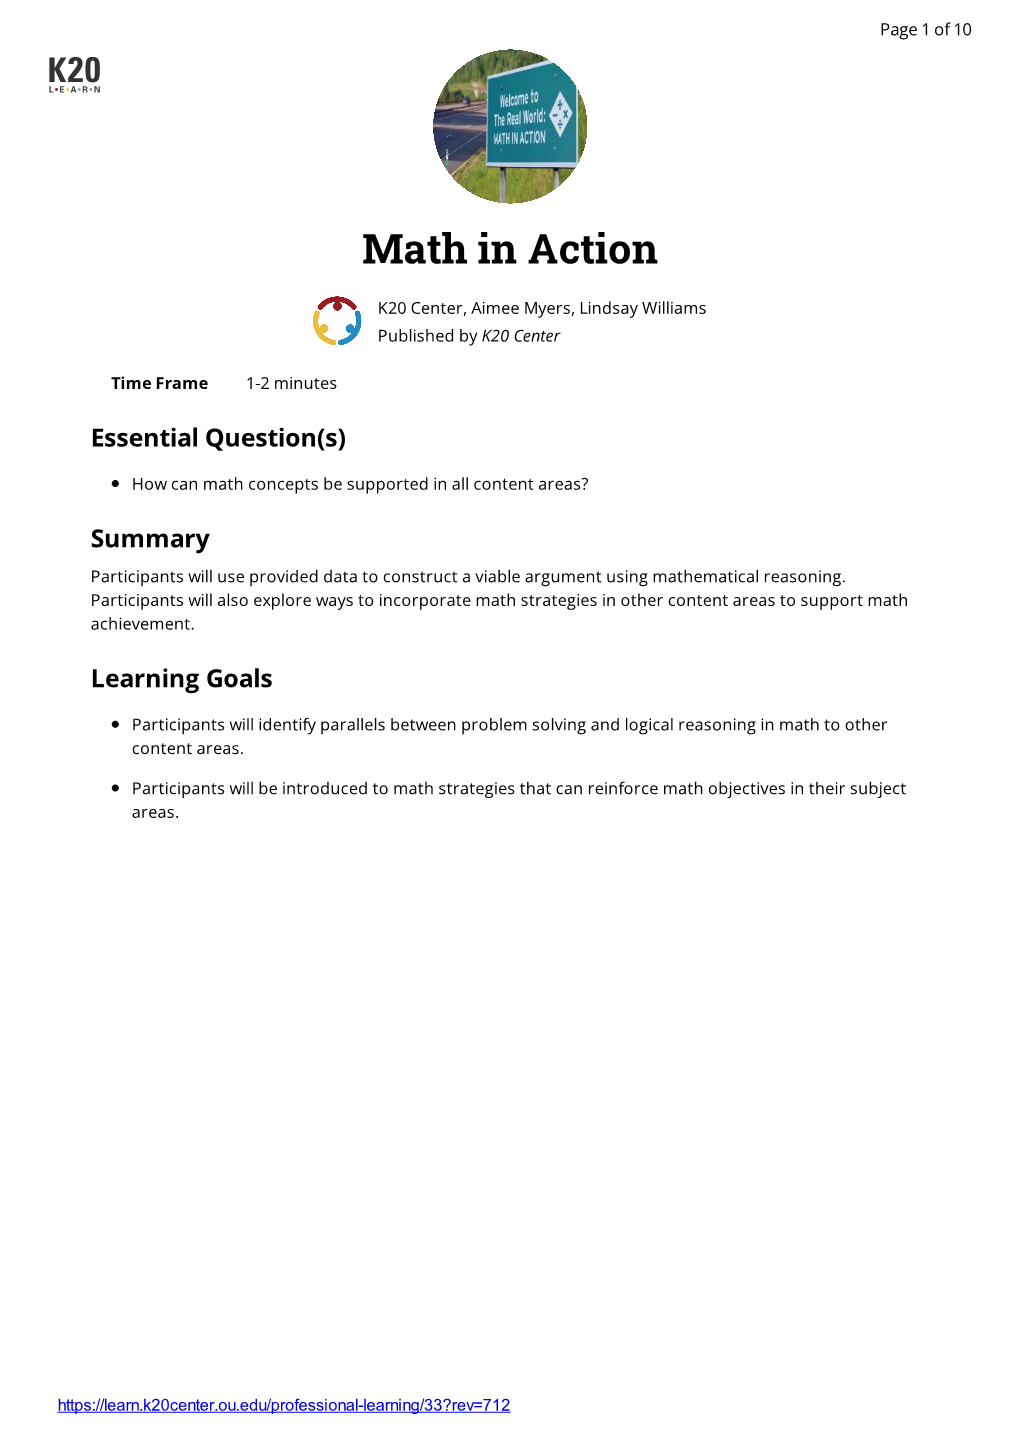 Math in Action K20 Center, Aimee Myers, Lindsay Williams Published by K20 Center